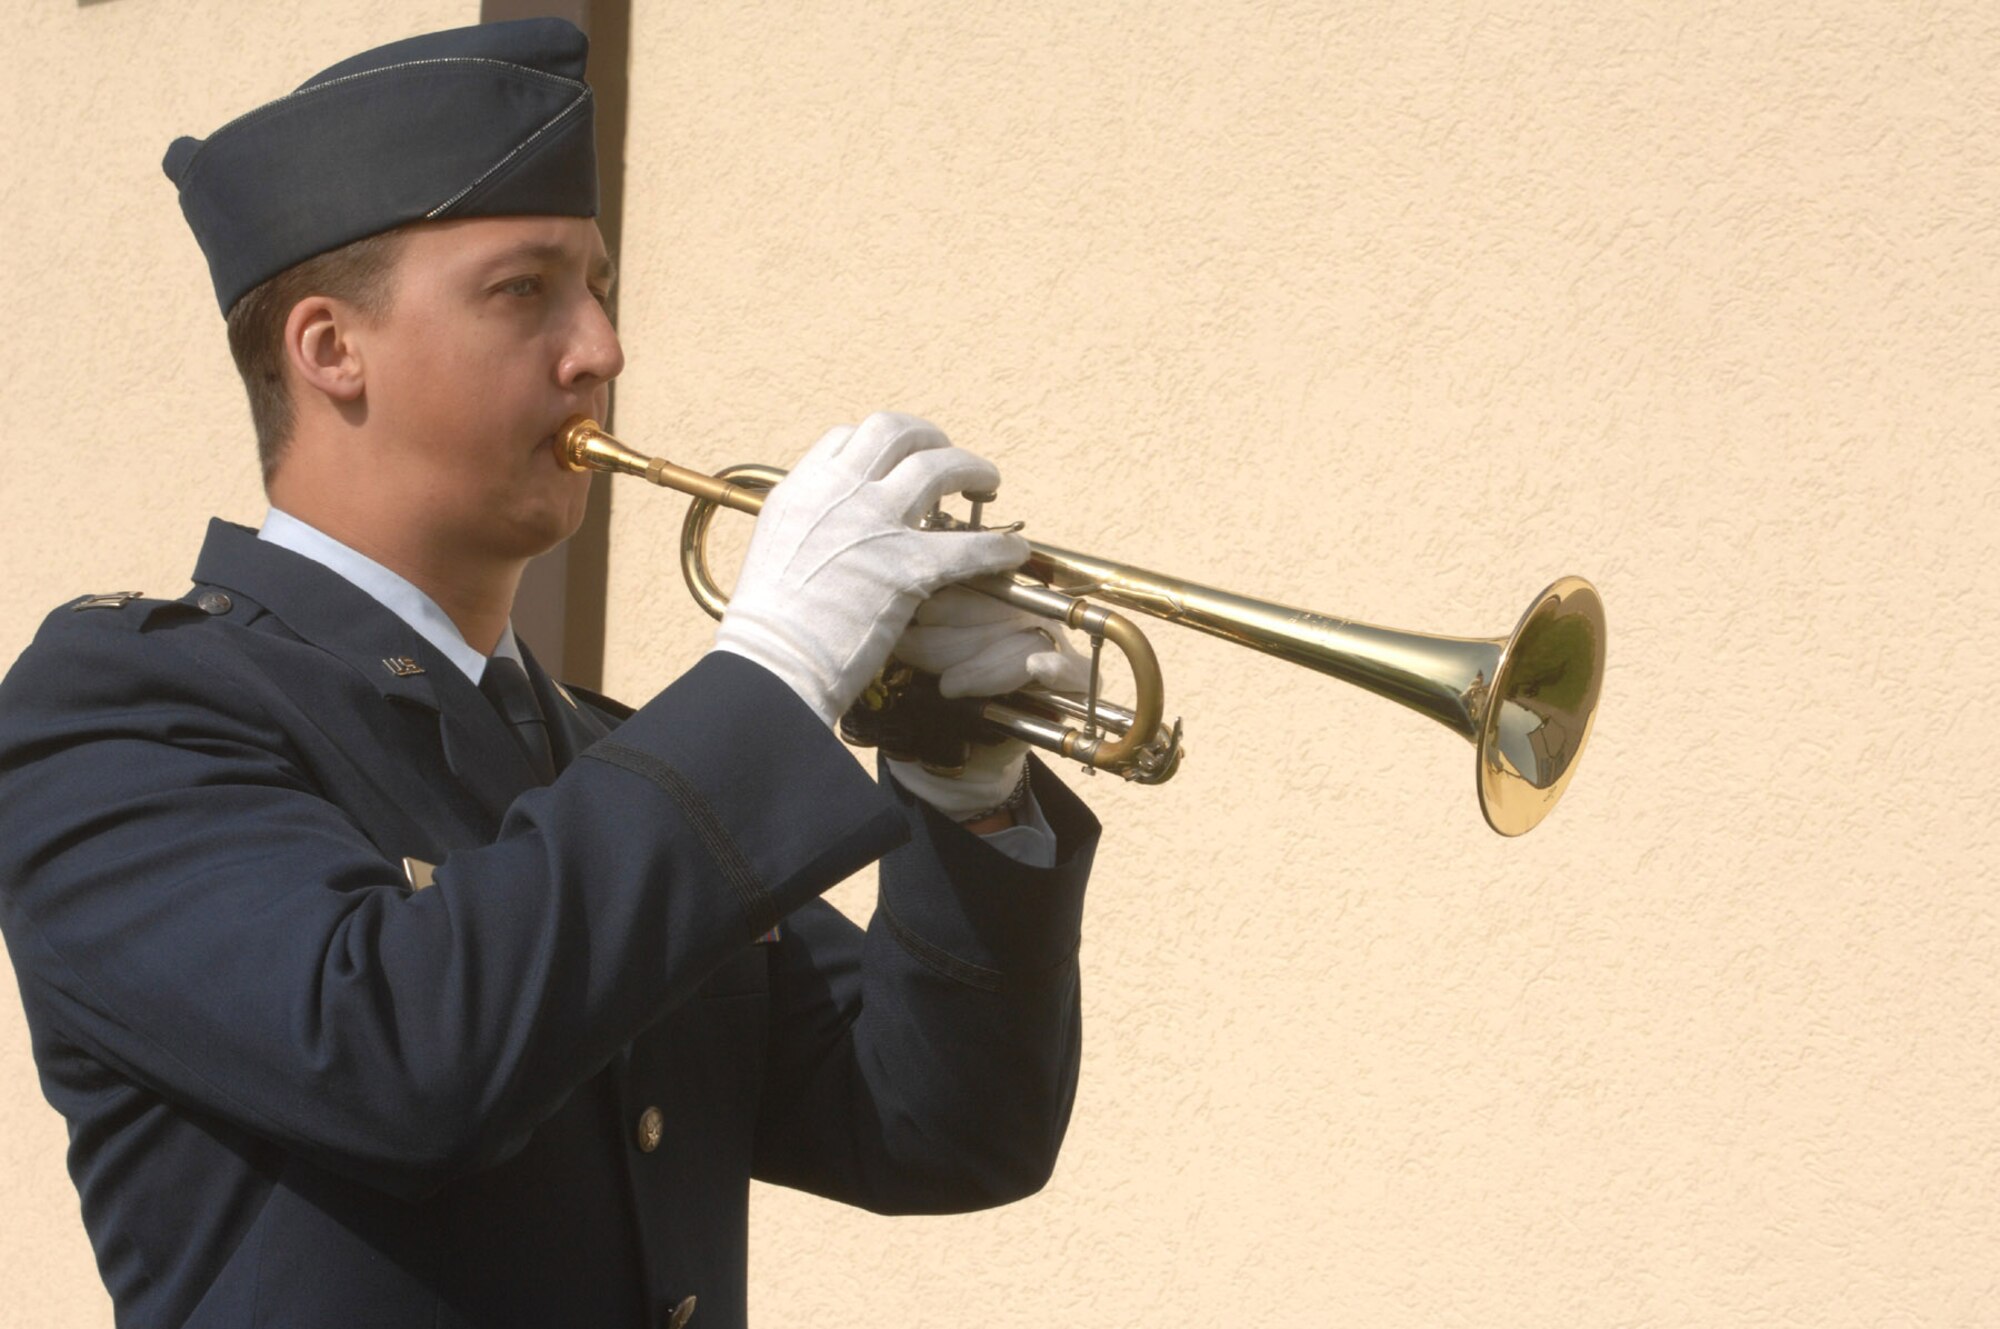 SPANGDHALEM AIR BASE, GERMANY – Capt. Mike McCarthy, 23rd Fighter Squadron, plays Taps during a ceremony memorializing the life of Maj. Troy Gilbert at Bitburg High School April 5. Major Gilbert a BHS graduate lost his life while serving in support of Operation Iraqi Freedom Nov. 26 while he was on a mission providing combat support to an Army helicopter crew that had crashed as well as the ground forces trying to reach the crash site in the Anbar Province, 20 miles northwest of Baghdad. (US Air Force photo by Airman 1st Class Emily Moore)